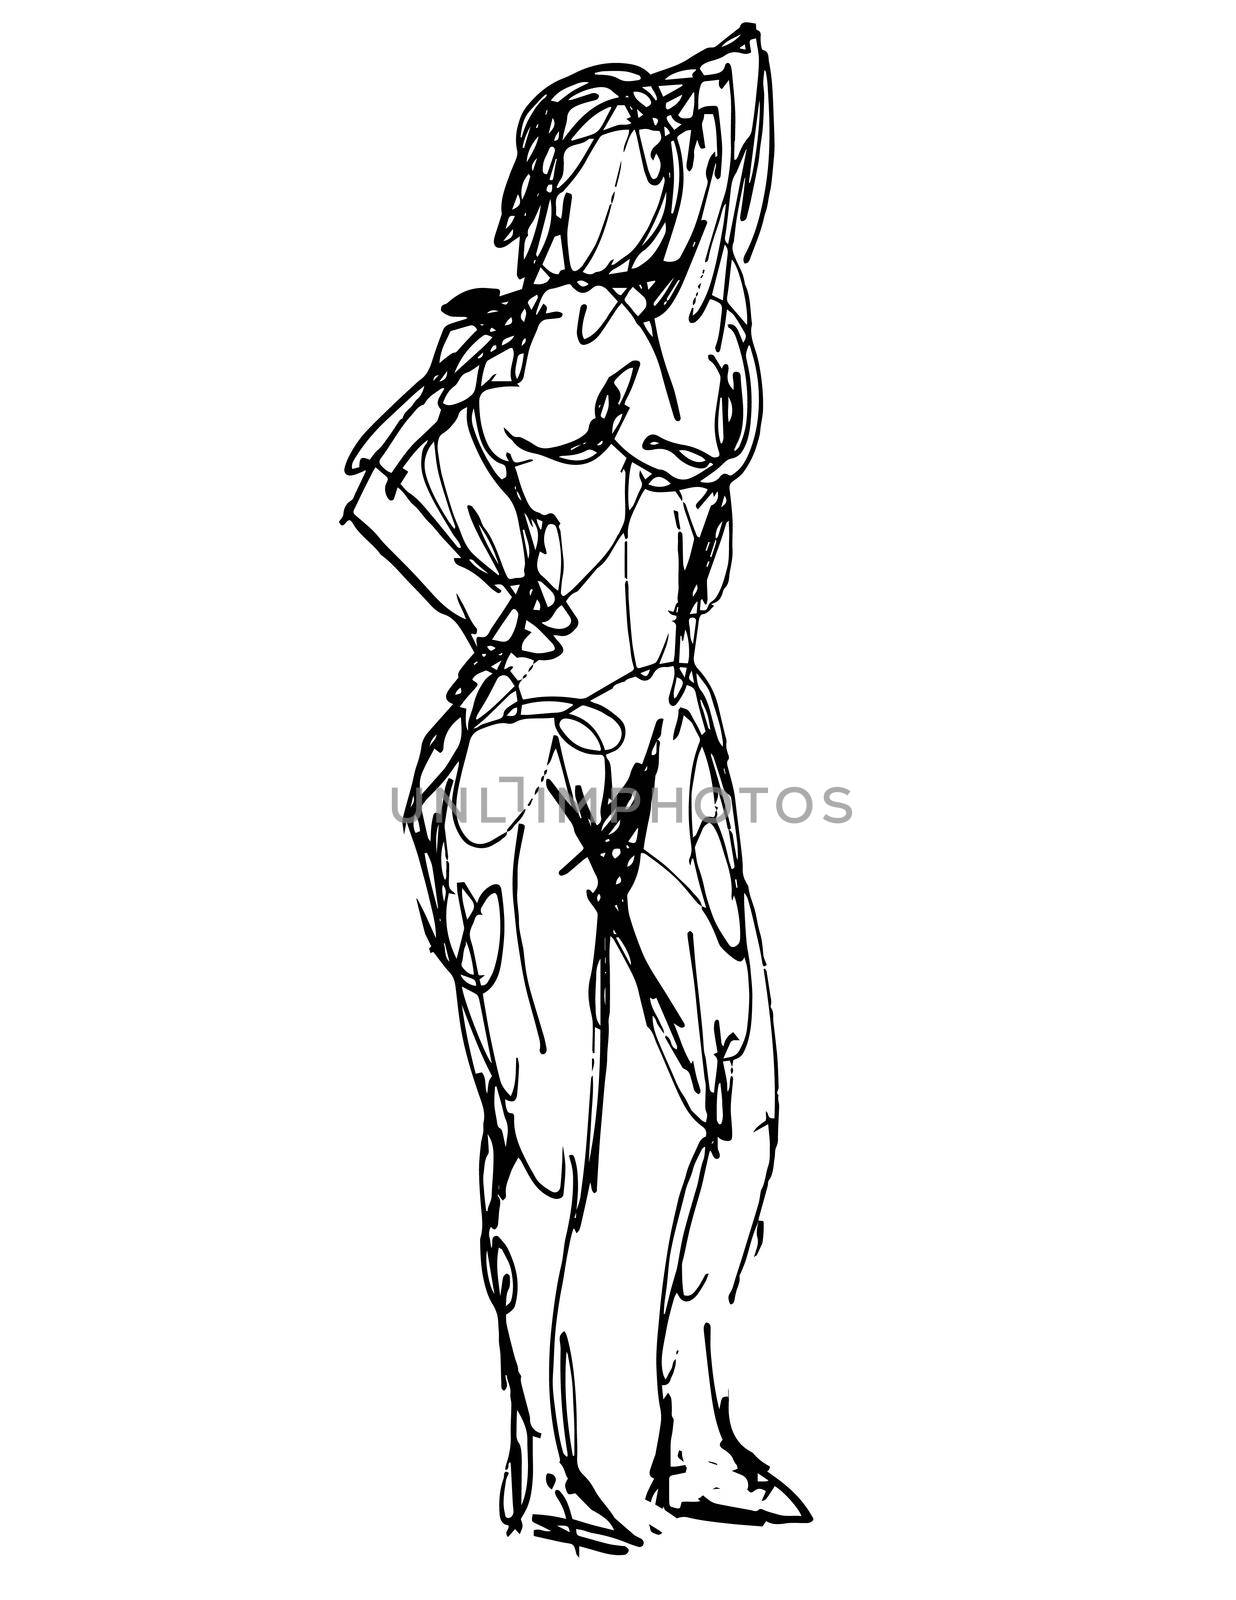 Nude Female Human Figure Posing With Hand Behind Head Front View Doodle Art Line Drawing  by patrimonio